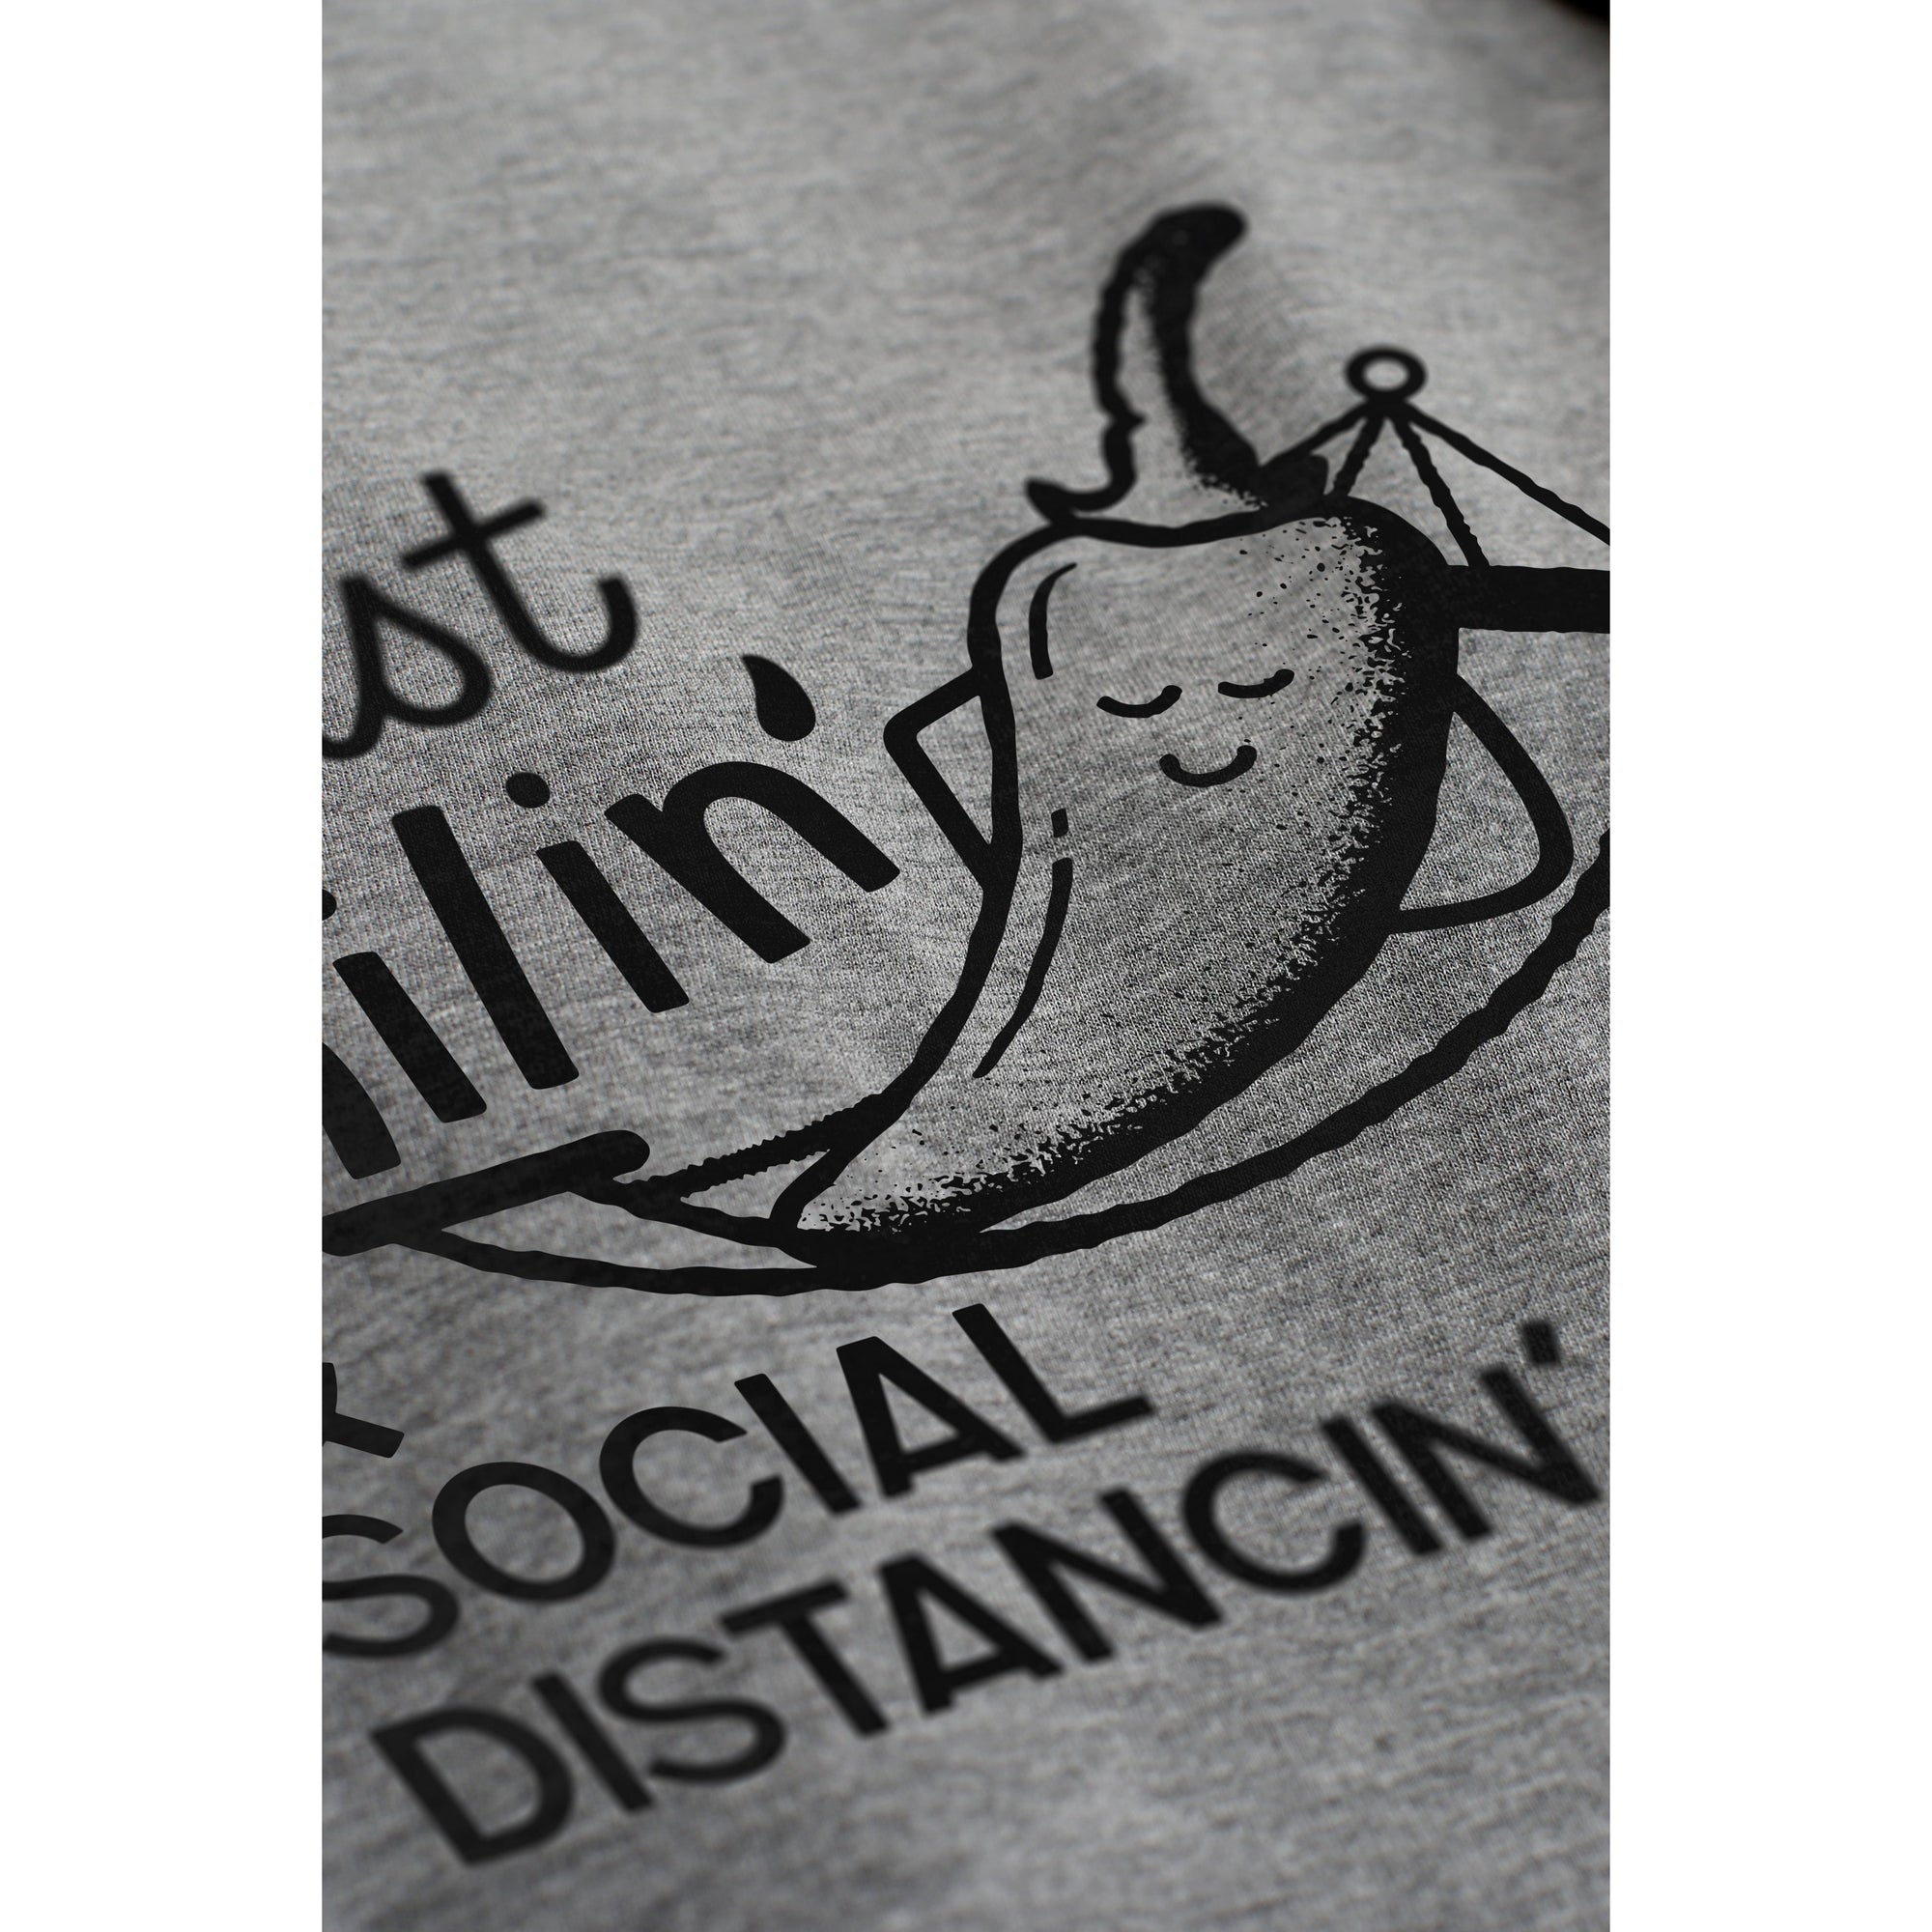 Just Chilin' And Social Distancin' - Stories You Can Wear by Thread Tank